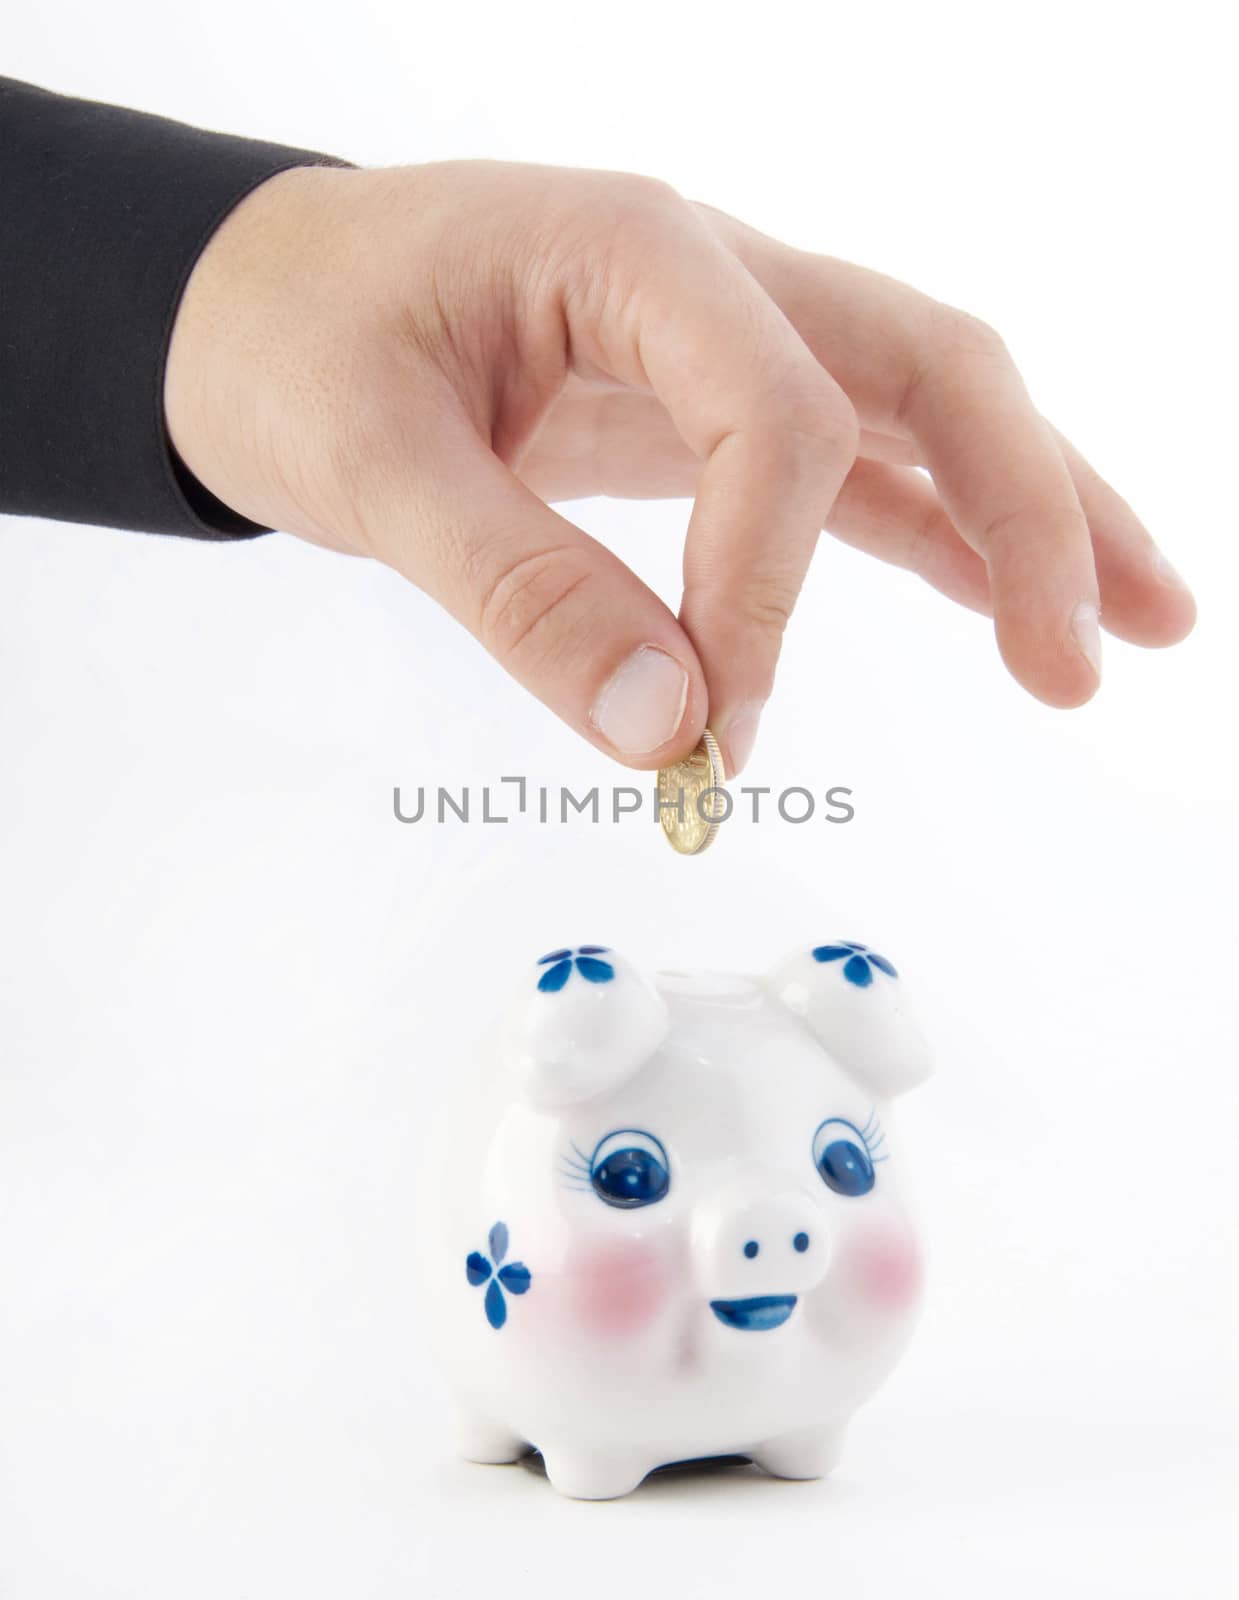 Hand inserting coin into piggy-bank